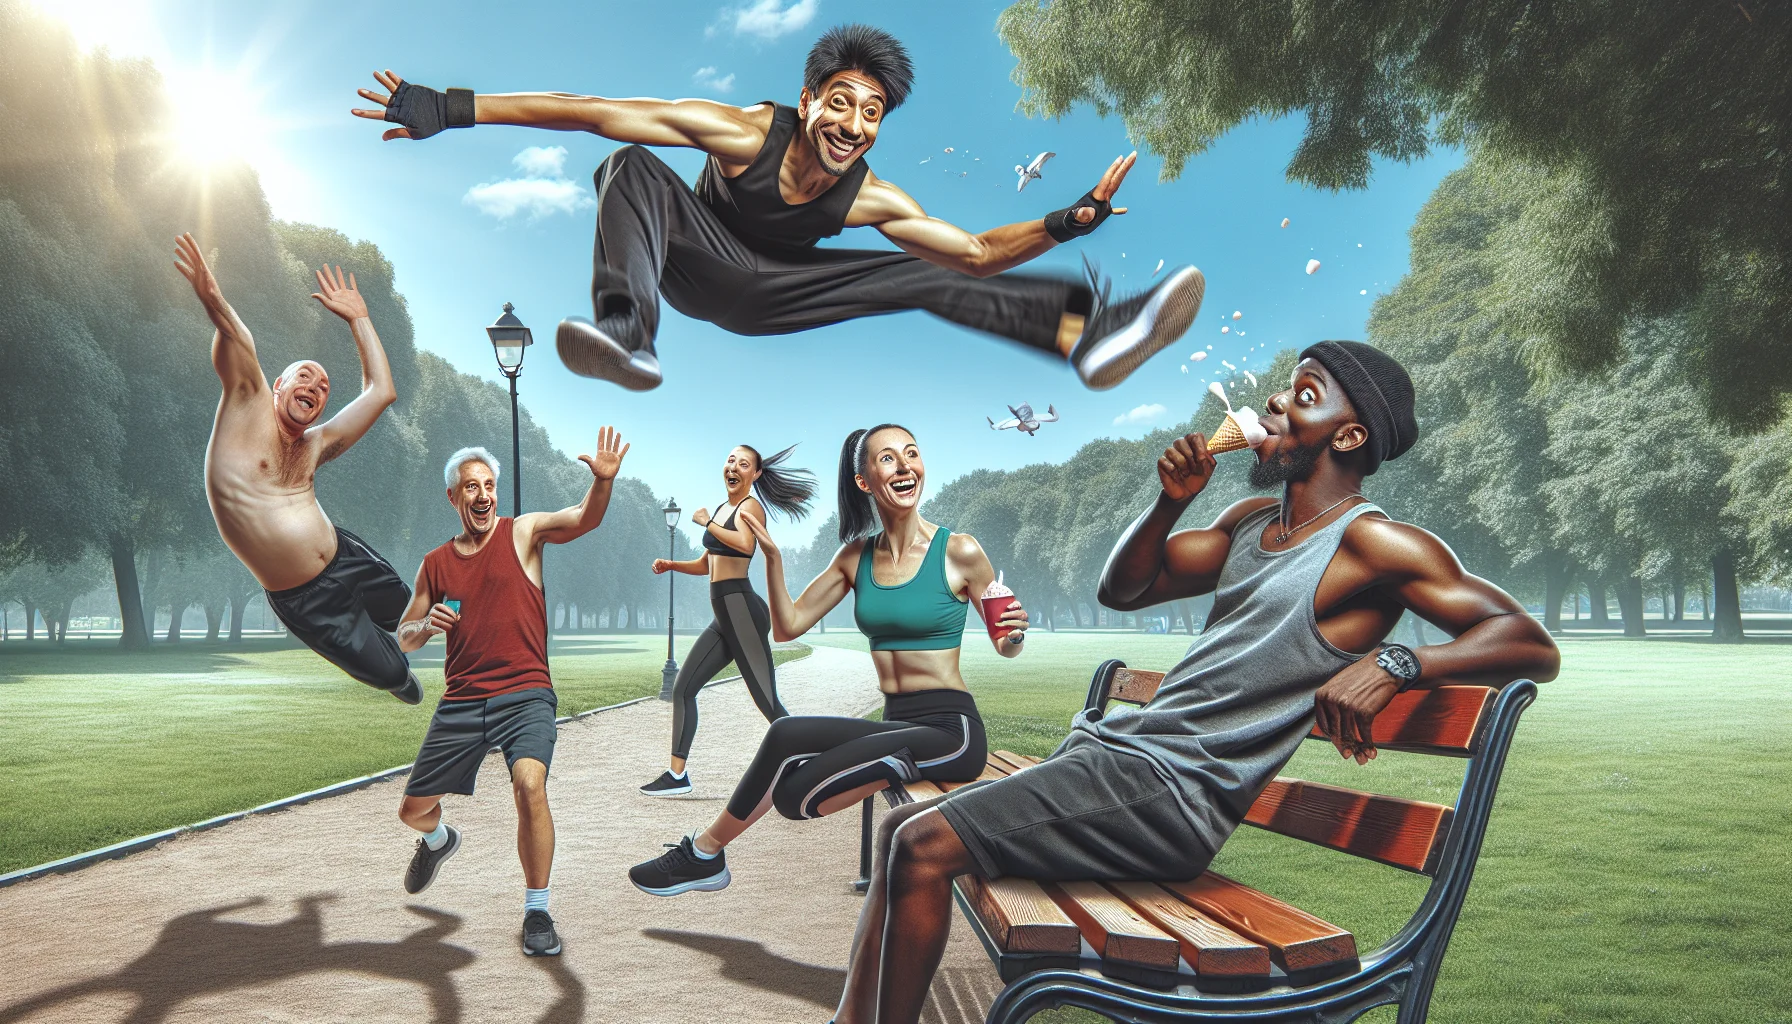 Create an aesthetically appealing and humorous image that portrays a parkour scenario in a public place that promotes physical exercise. Showcase an energetic parkour enthusiast of South Asian descent with a jovial expression, performing an audacious flip over a park bench. Adding to the comedy, a Caucasian woman in sporty attire watches in awe, dropping her ice cream in surprise. A black man in jogging gear, laughs heartily on the side. Include a clear, blue sky and lush greenery of the park in the background, to give a lively and motivating atmosphere.